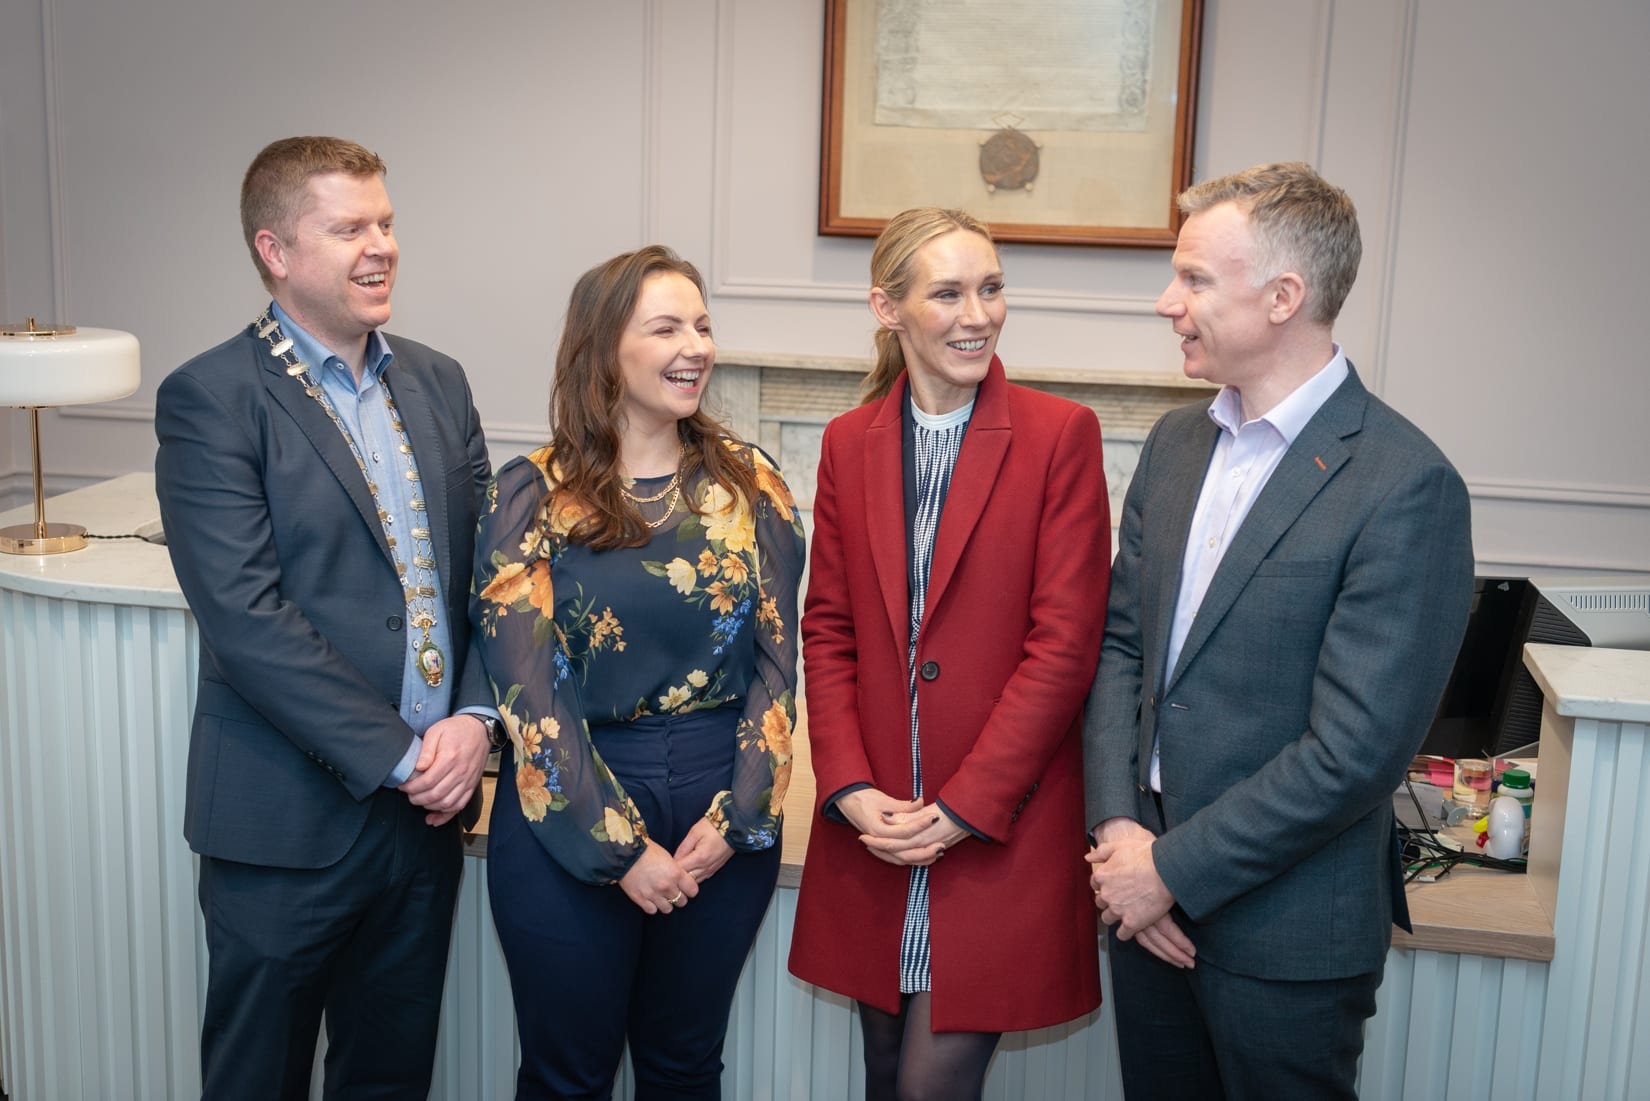 No repro fee-Limerick Chamber AGM 2020 which was held in Limerick Chamber Boardroom on Thursday 27th February - From Left to Right:  Eoin Ryan - President Limerick Chamber, Dr Caitriona Cahill - Limerick Chamber ,Dee Ryan - CEO Limerick Chamber, Dave Jefferies - Vice President Limerick Chamber, 
Photo credit Shauna Kennedy